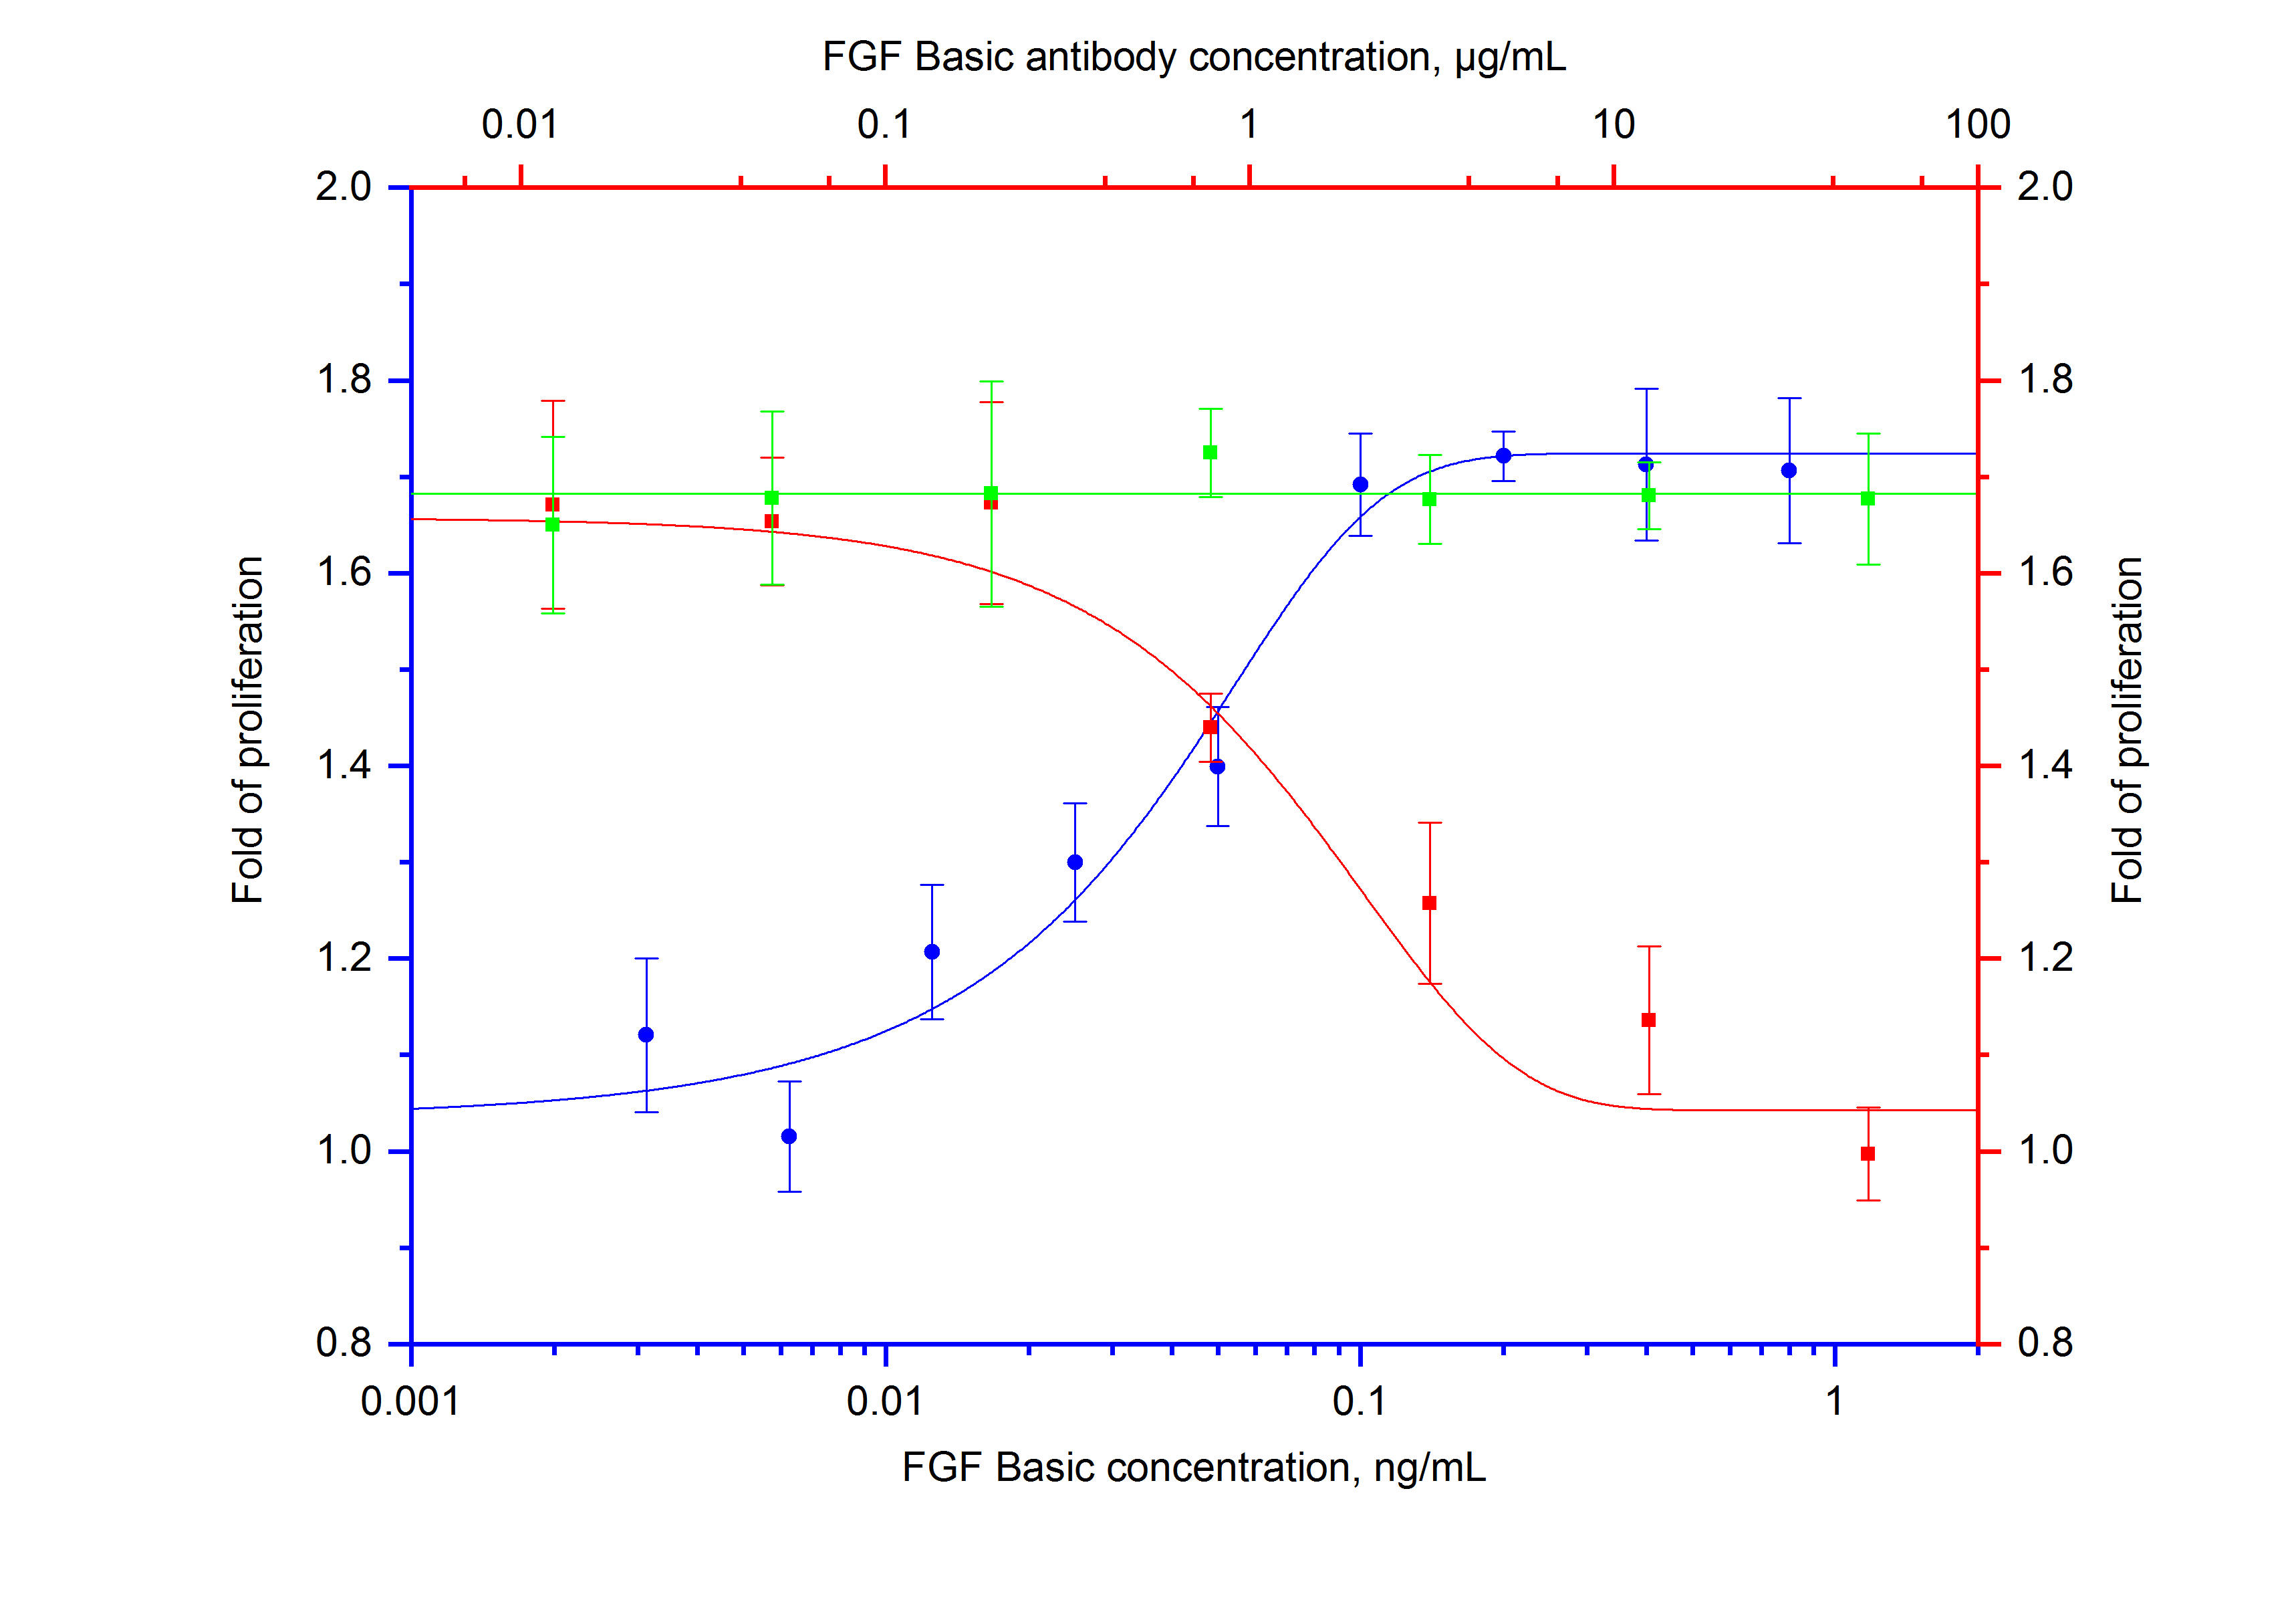 Recombinant human FGF Basic (Cat.NO. HZ-1285) stimulates the proliferation of BALB/3T3 cells (mouse fibroblast cell) at low FBS condition in a dose-dependent manner (blue curve, refer to bottom X-left Y axis). The activity of human FGF Basic (0.1 ng/mL HZ-1285) is neutralized by mouse anti-human FGF Basic monoclonal antibody 69024-1-Ig at serial dose (red curve, refer to top X-right Y axis). The ND50 is typically 1-10 µg/mL. Mouse IgG1 Isotype Control monoclonal antibody 66360-1-Ig was served as control (green curve, refer to top X-right Y axis).